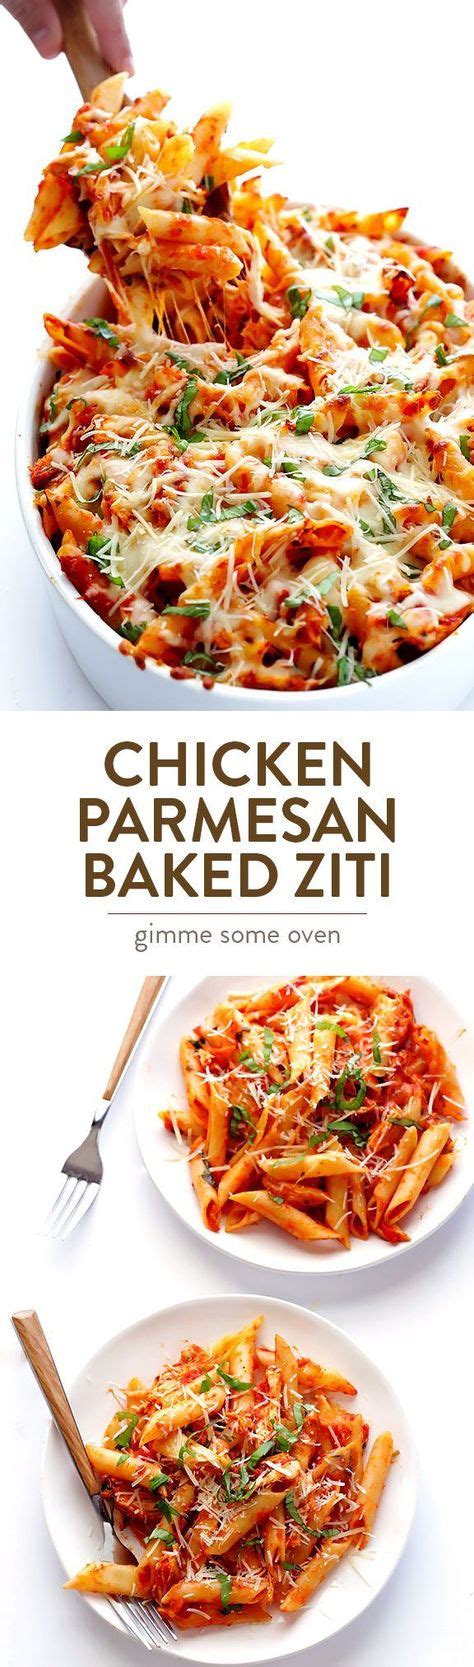 Chicken Parmesan Baked Ziti Gimme Some Oven Recipe Pasta Dishes